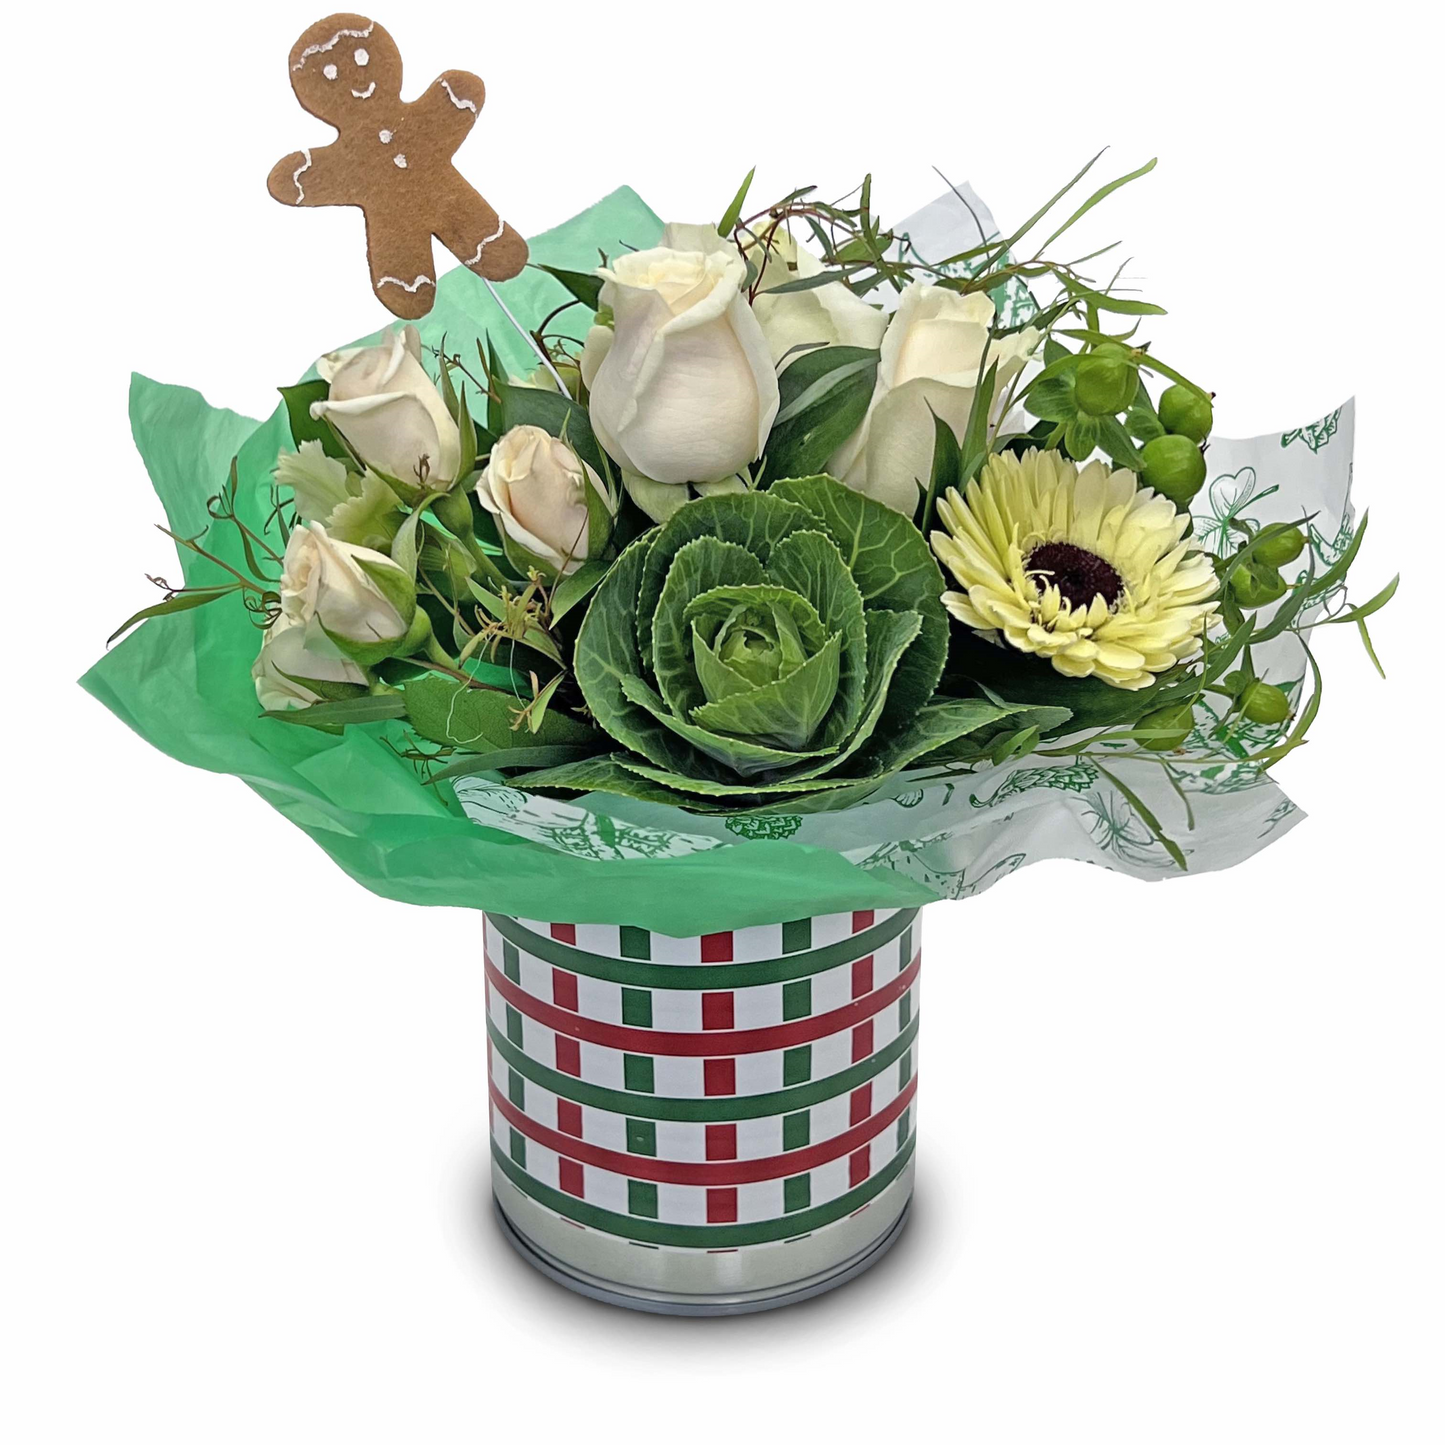 Country Chic Christmas Centerpieces